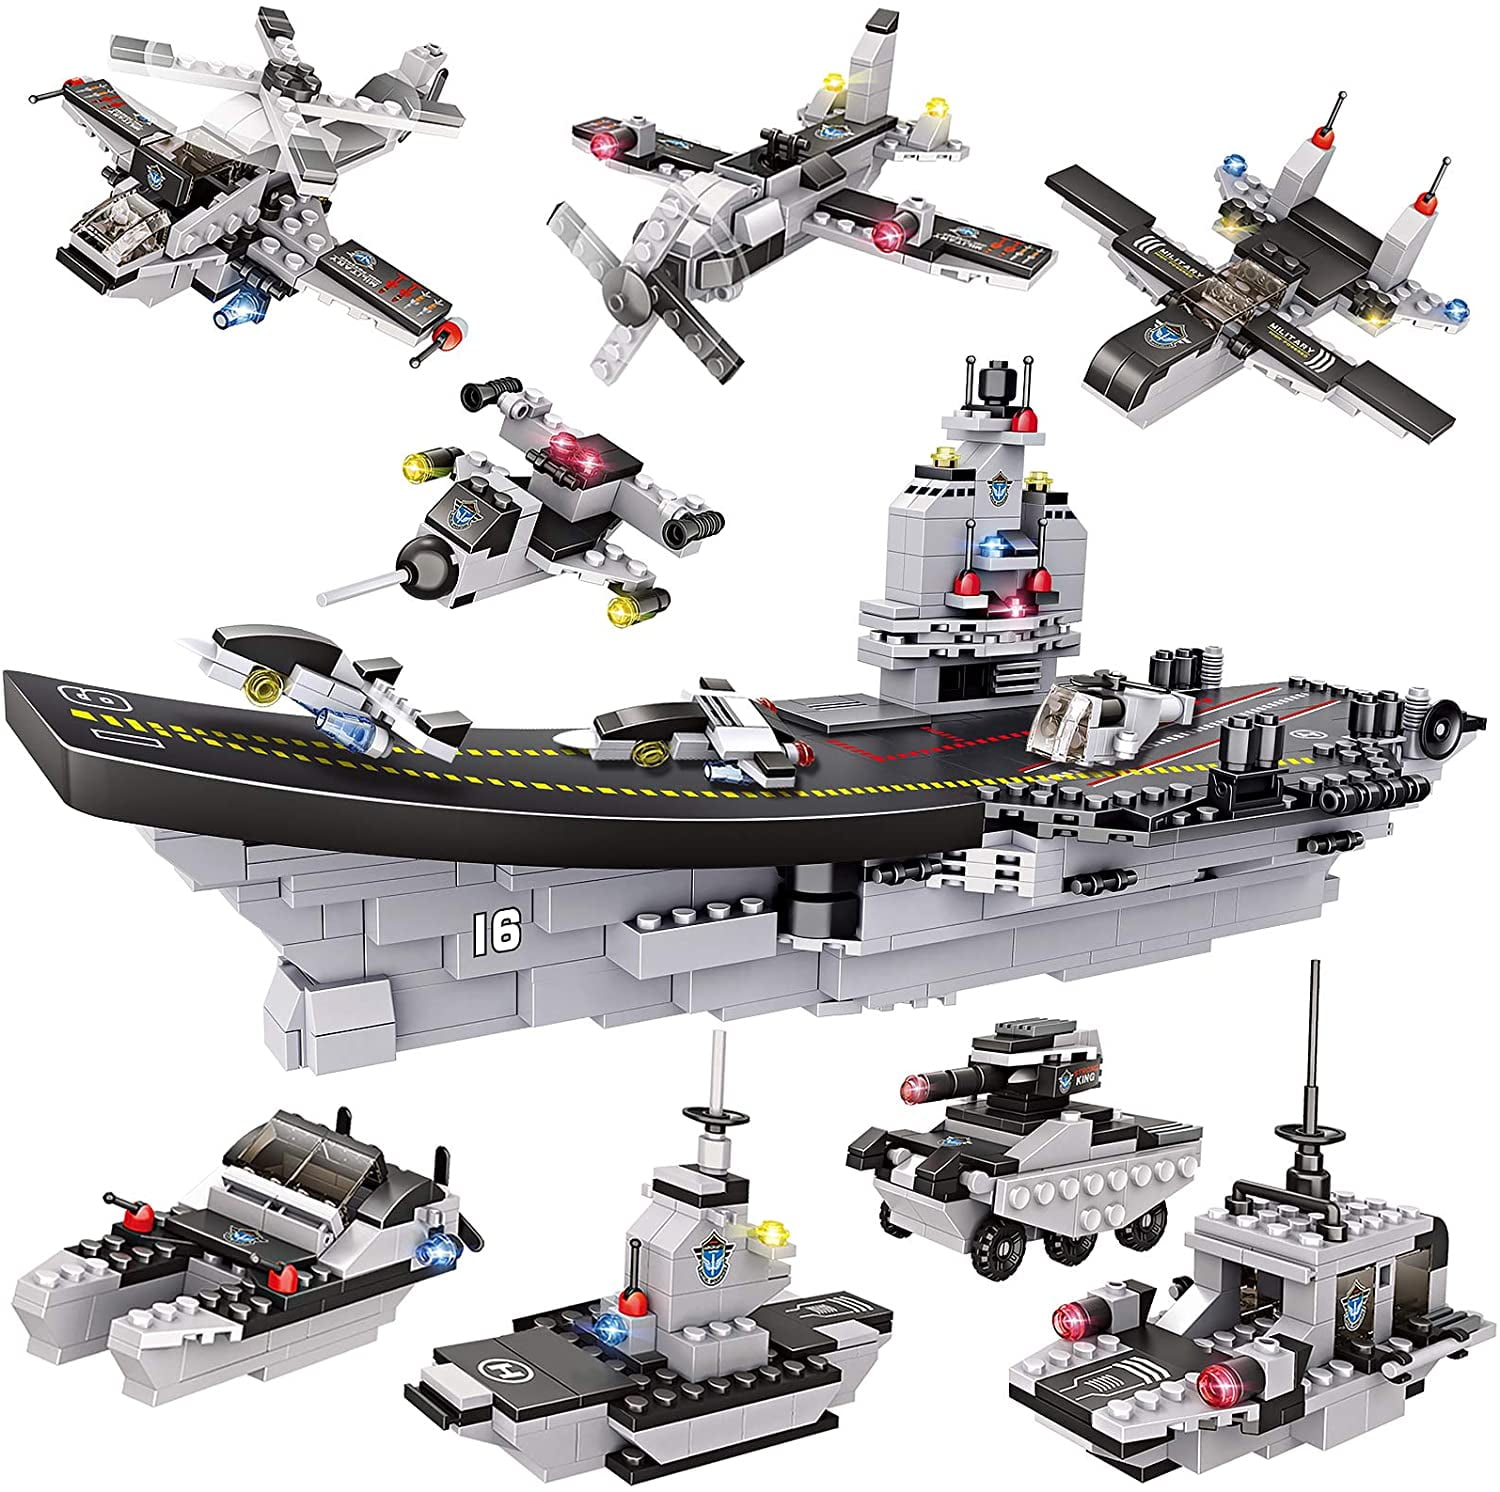 Army Military Series Aircraft Carrier Battleship Building Blocks toy Kids Gift